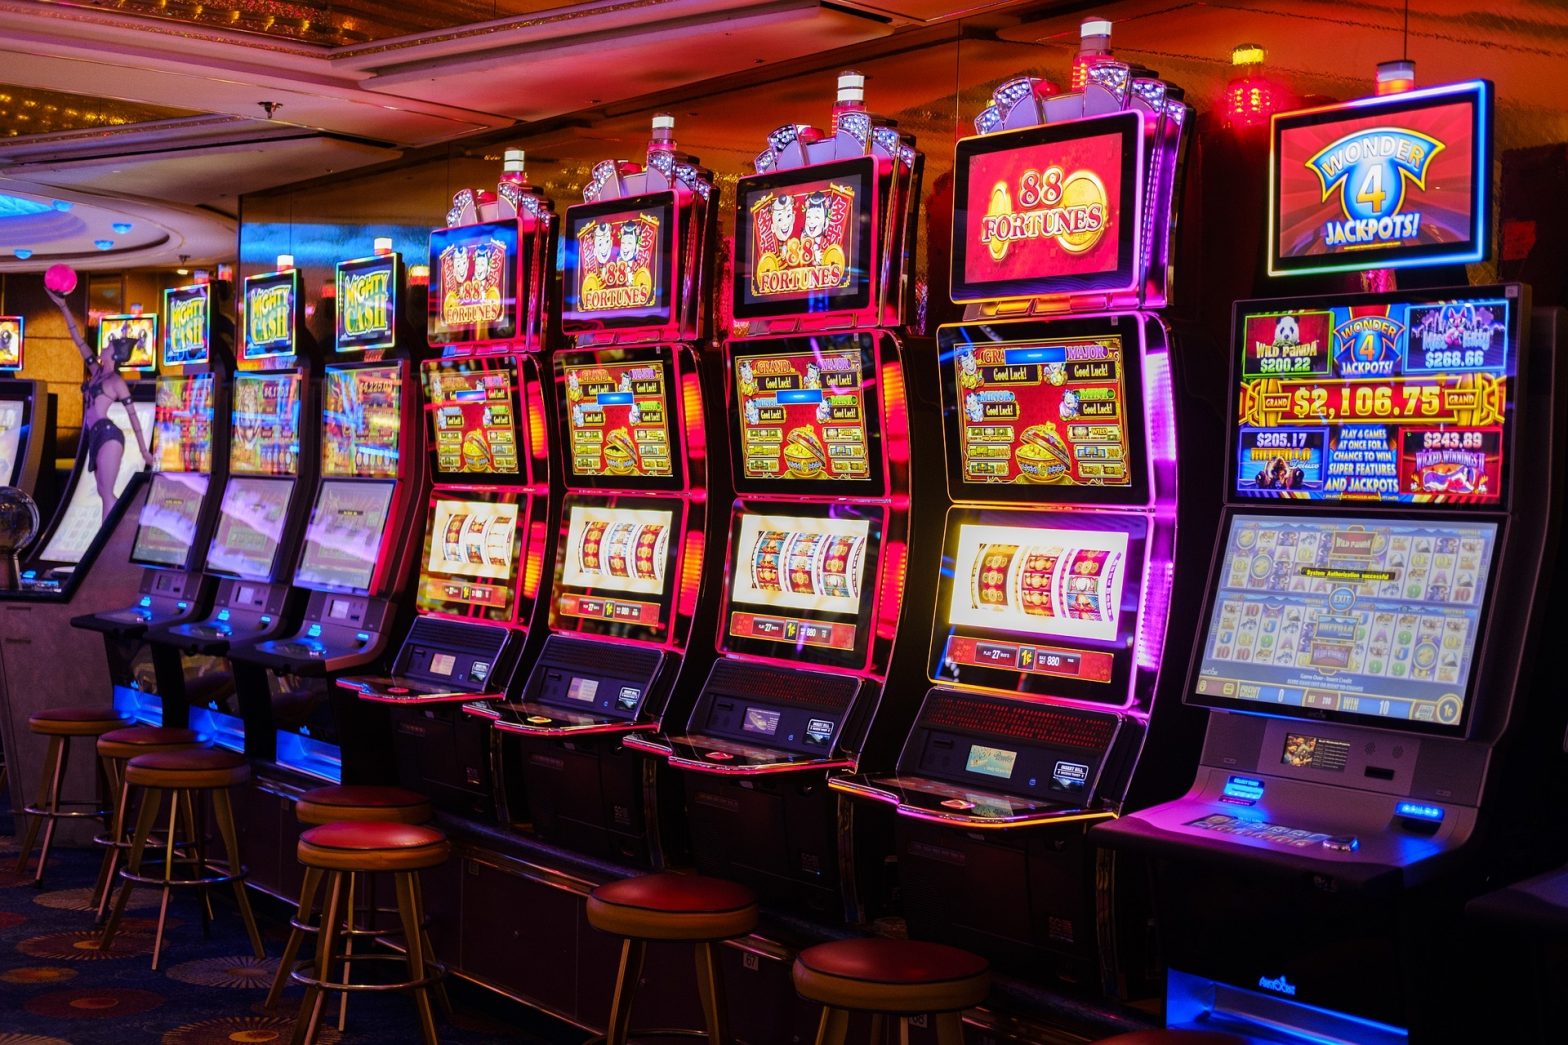 The Best Paying Playtech Slot Machines on the Internet